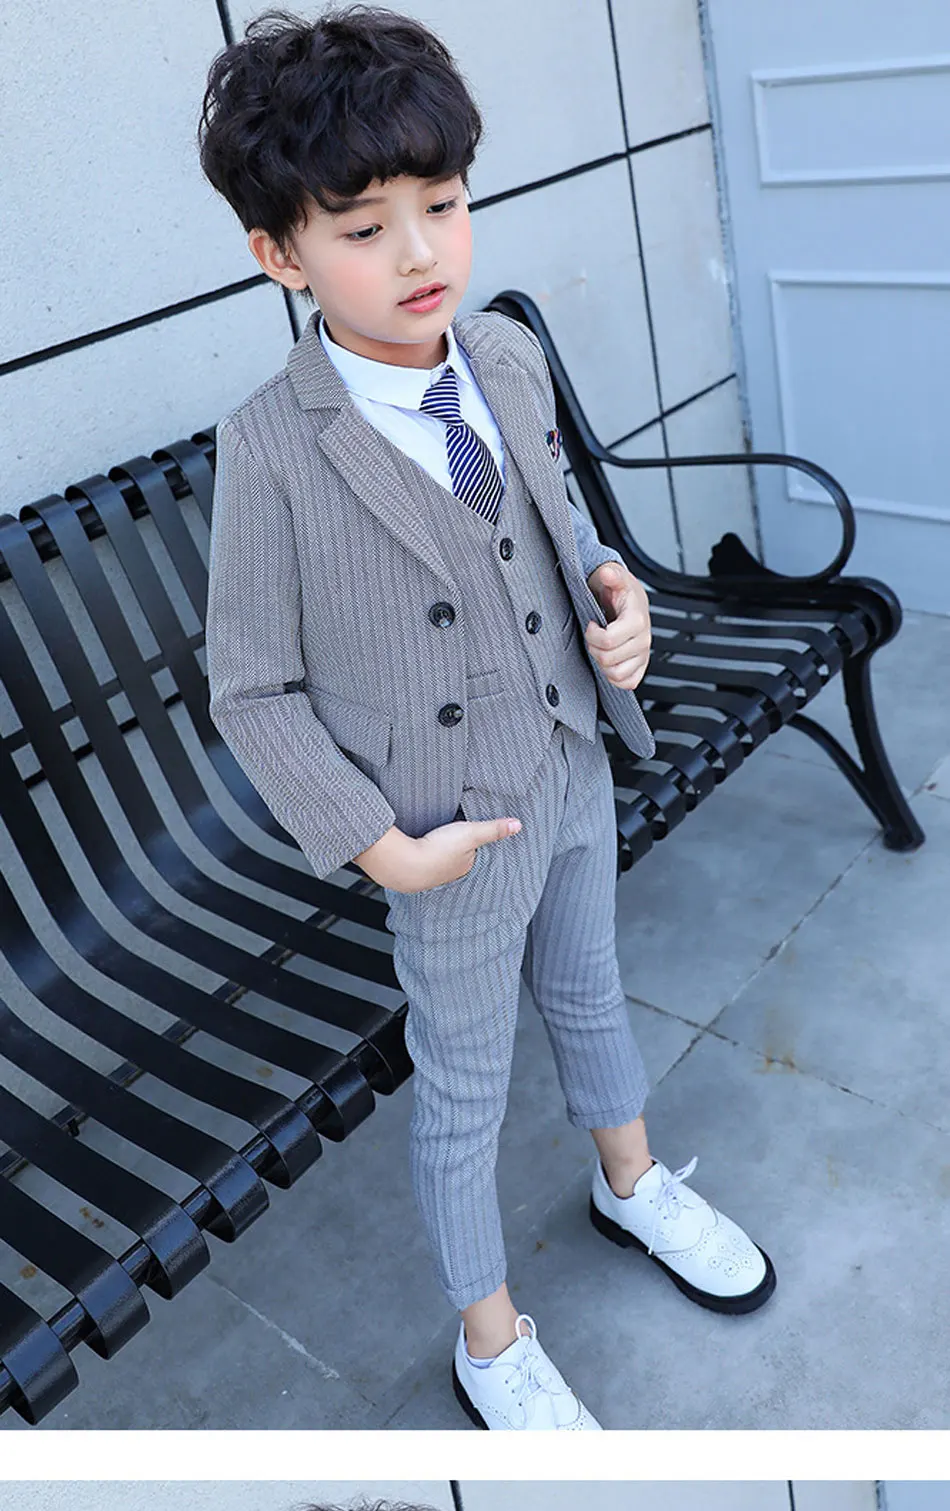 Children's Small Suit Autumn And Winter New Boys Striped Three-Piece Suit Jacket Vest Pants Flower Girl Wedding Birthday Dress